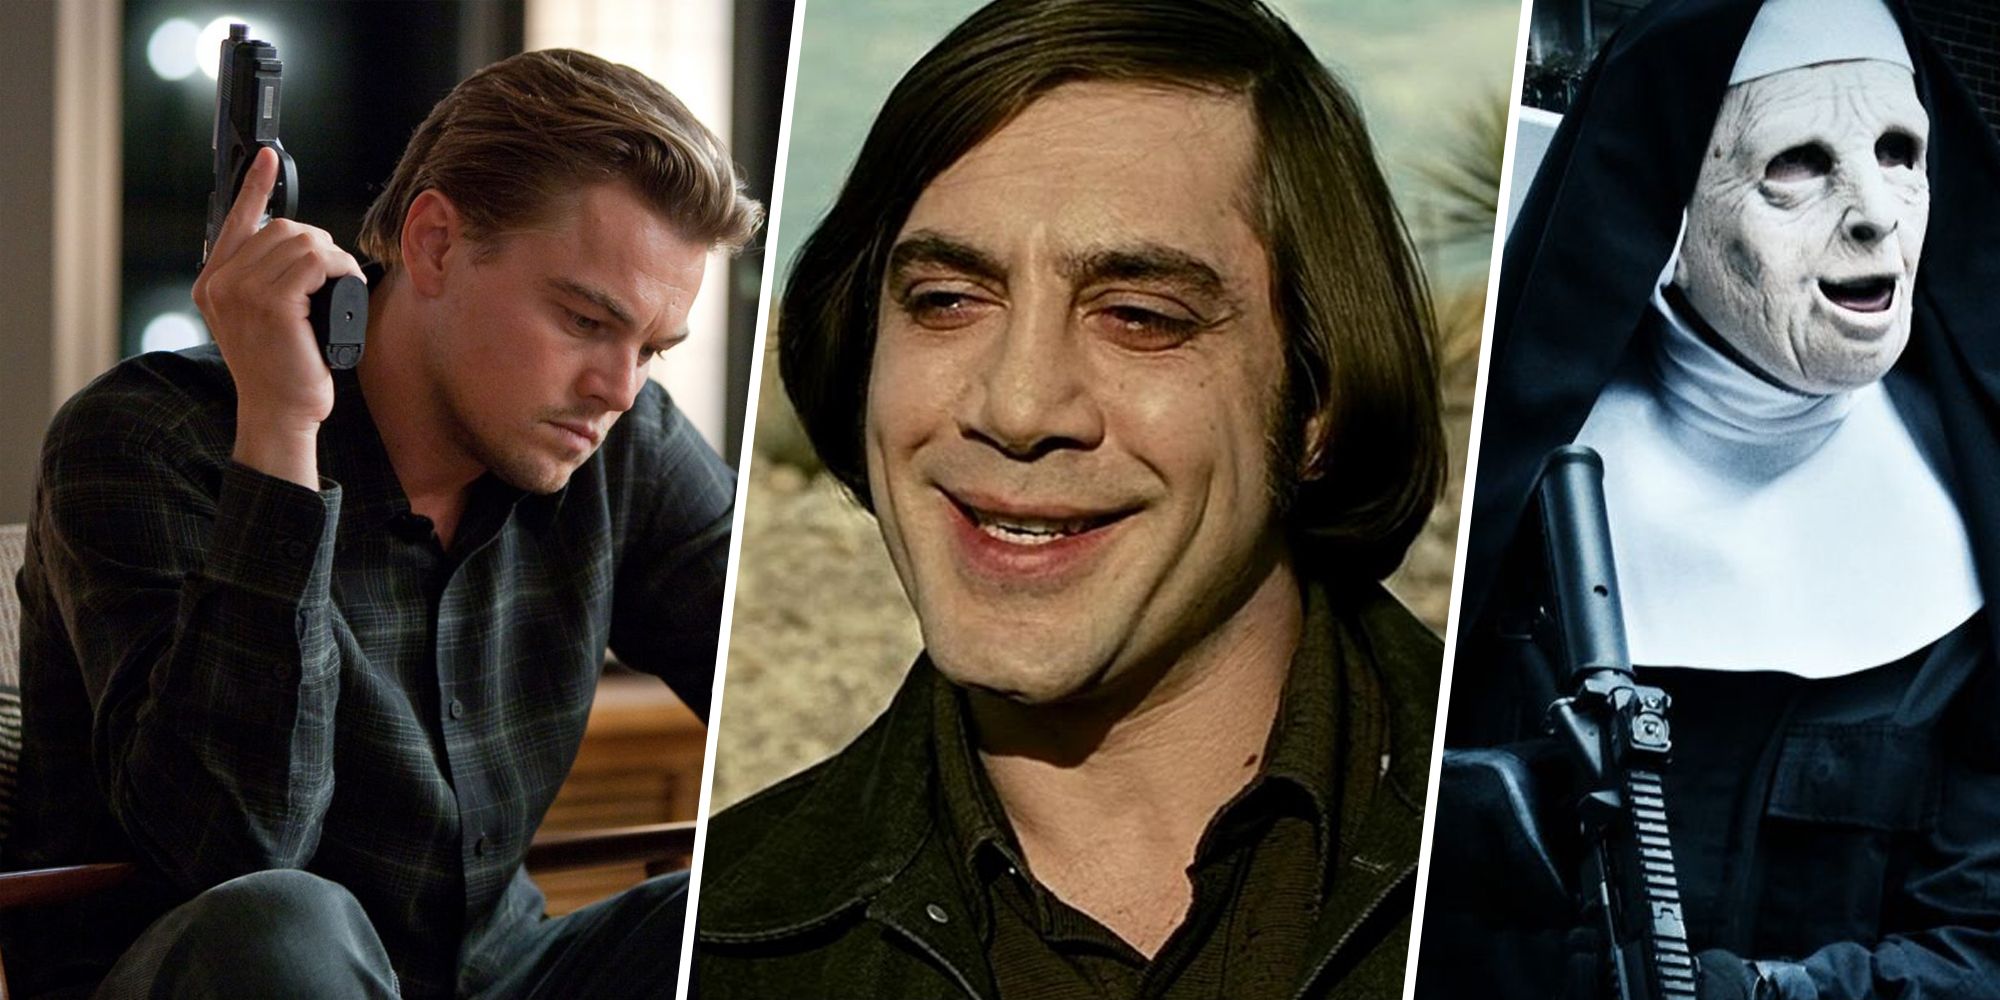 Cobb (DiCaprio) from Inception, Anton Chigurh (Bardem) from No Country for Old Men, and Doug (Affleck) from The Town